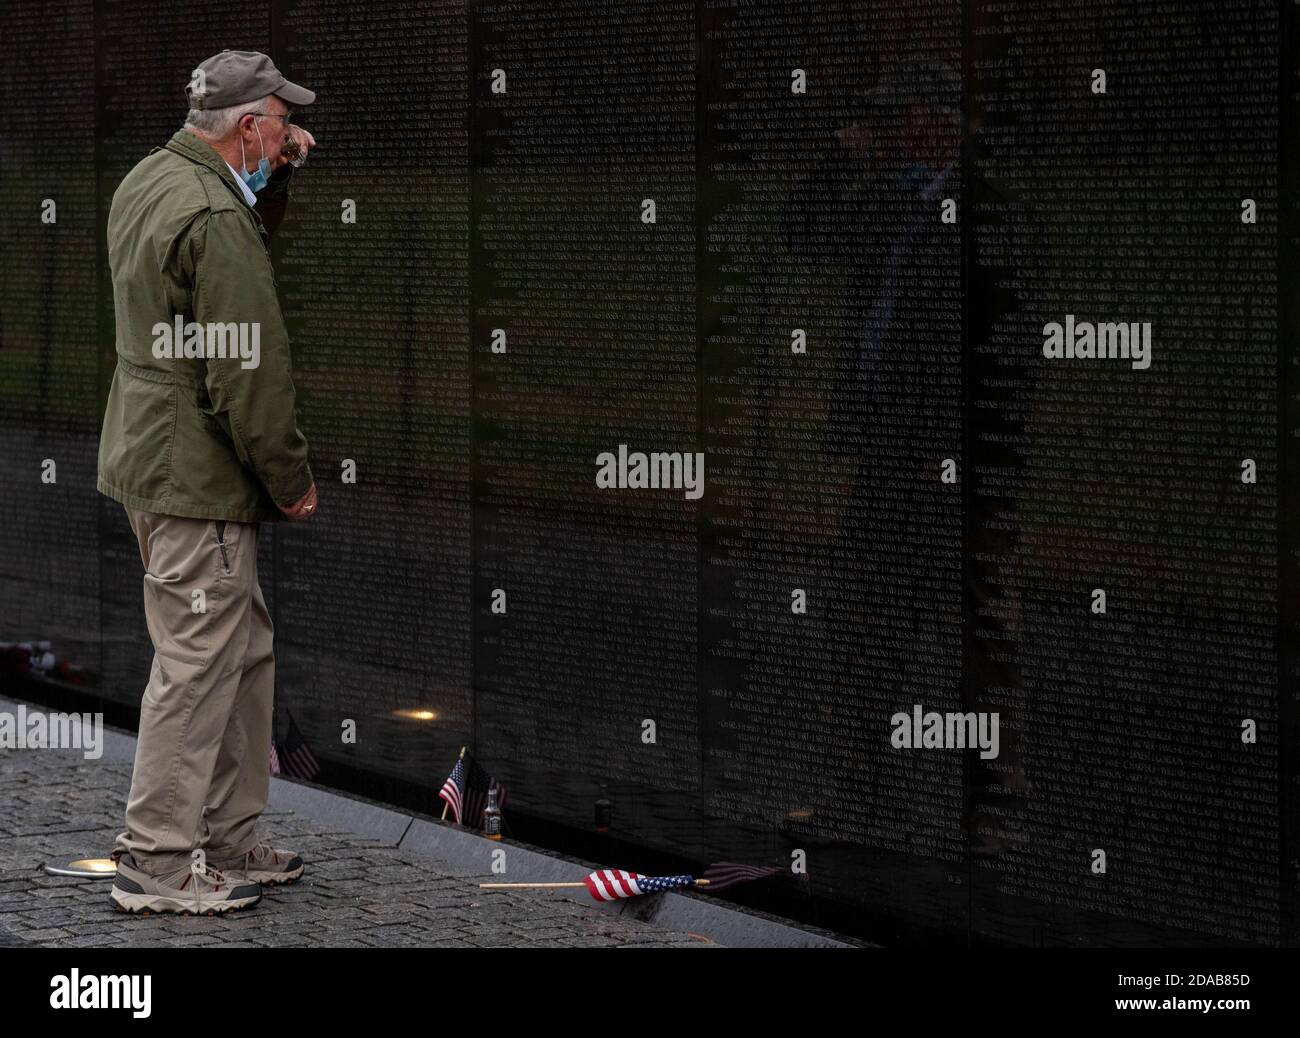 Washington, United States. 11th Nov, 2020. Jack Cowling, a Marine Corp veteran, HMM 364, does a shot of Jack Daniels as he visits the site of his good buddy Staff Sergeant Barney Barnhart at the Vietnam Memorial on Veterans Day in Washington, DC on Wednesday, November 11, 2020. Cowling does a shot of Jack Daniels and leaves another shot for his friend at the site every year. Veterans Day is a federal holiday in the United States observed annually on November 11, for honoring military veterans who have served in the United States Armed Forces. Photo by Ken Cedeno/UPI Stock Photo